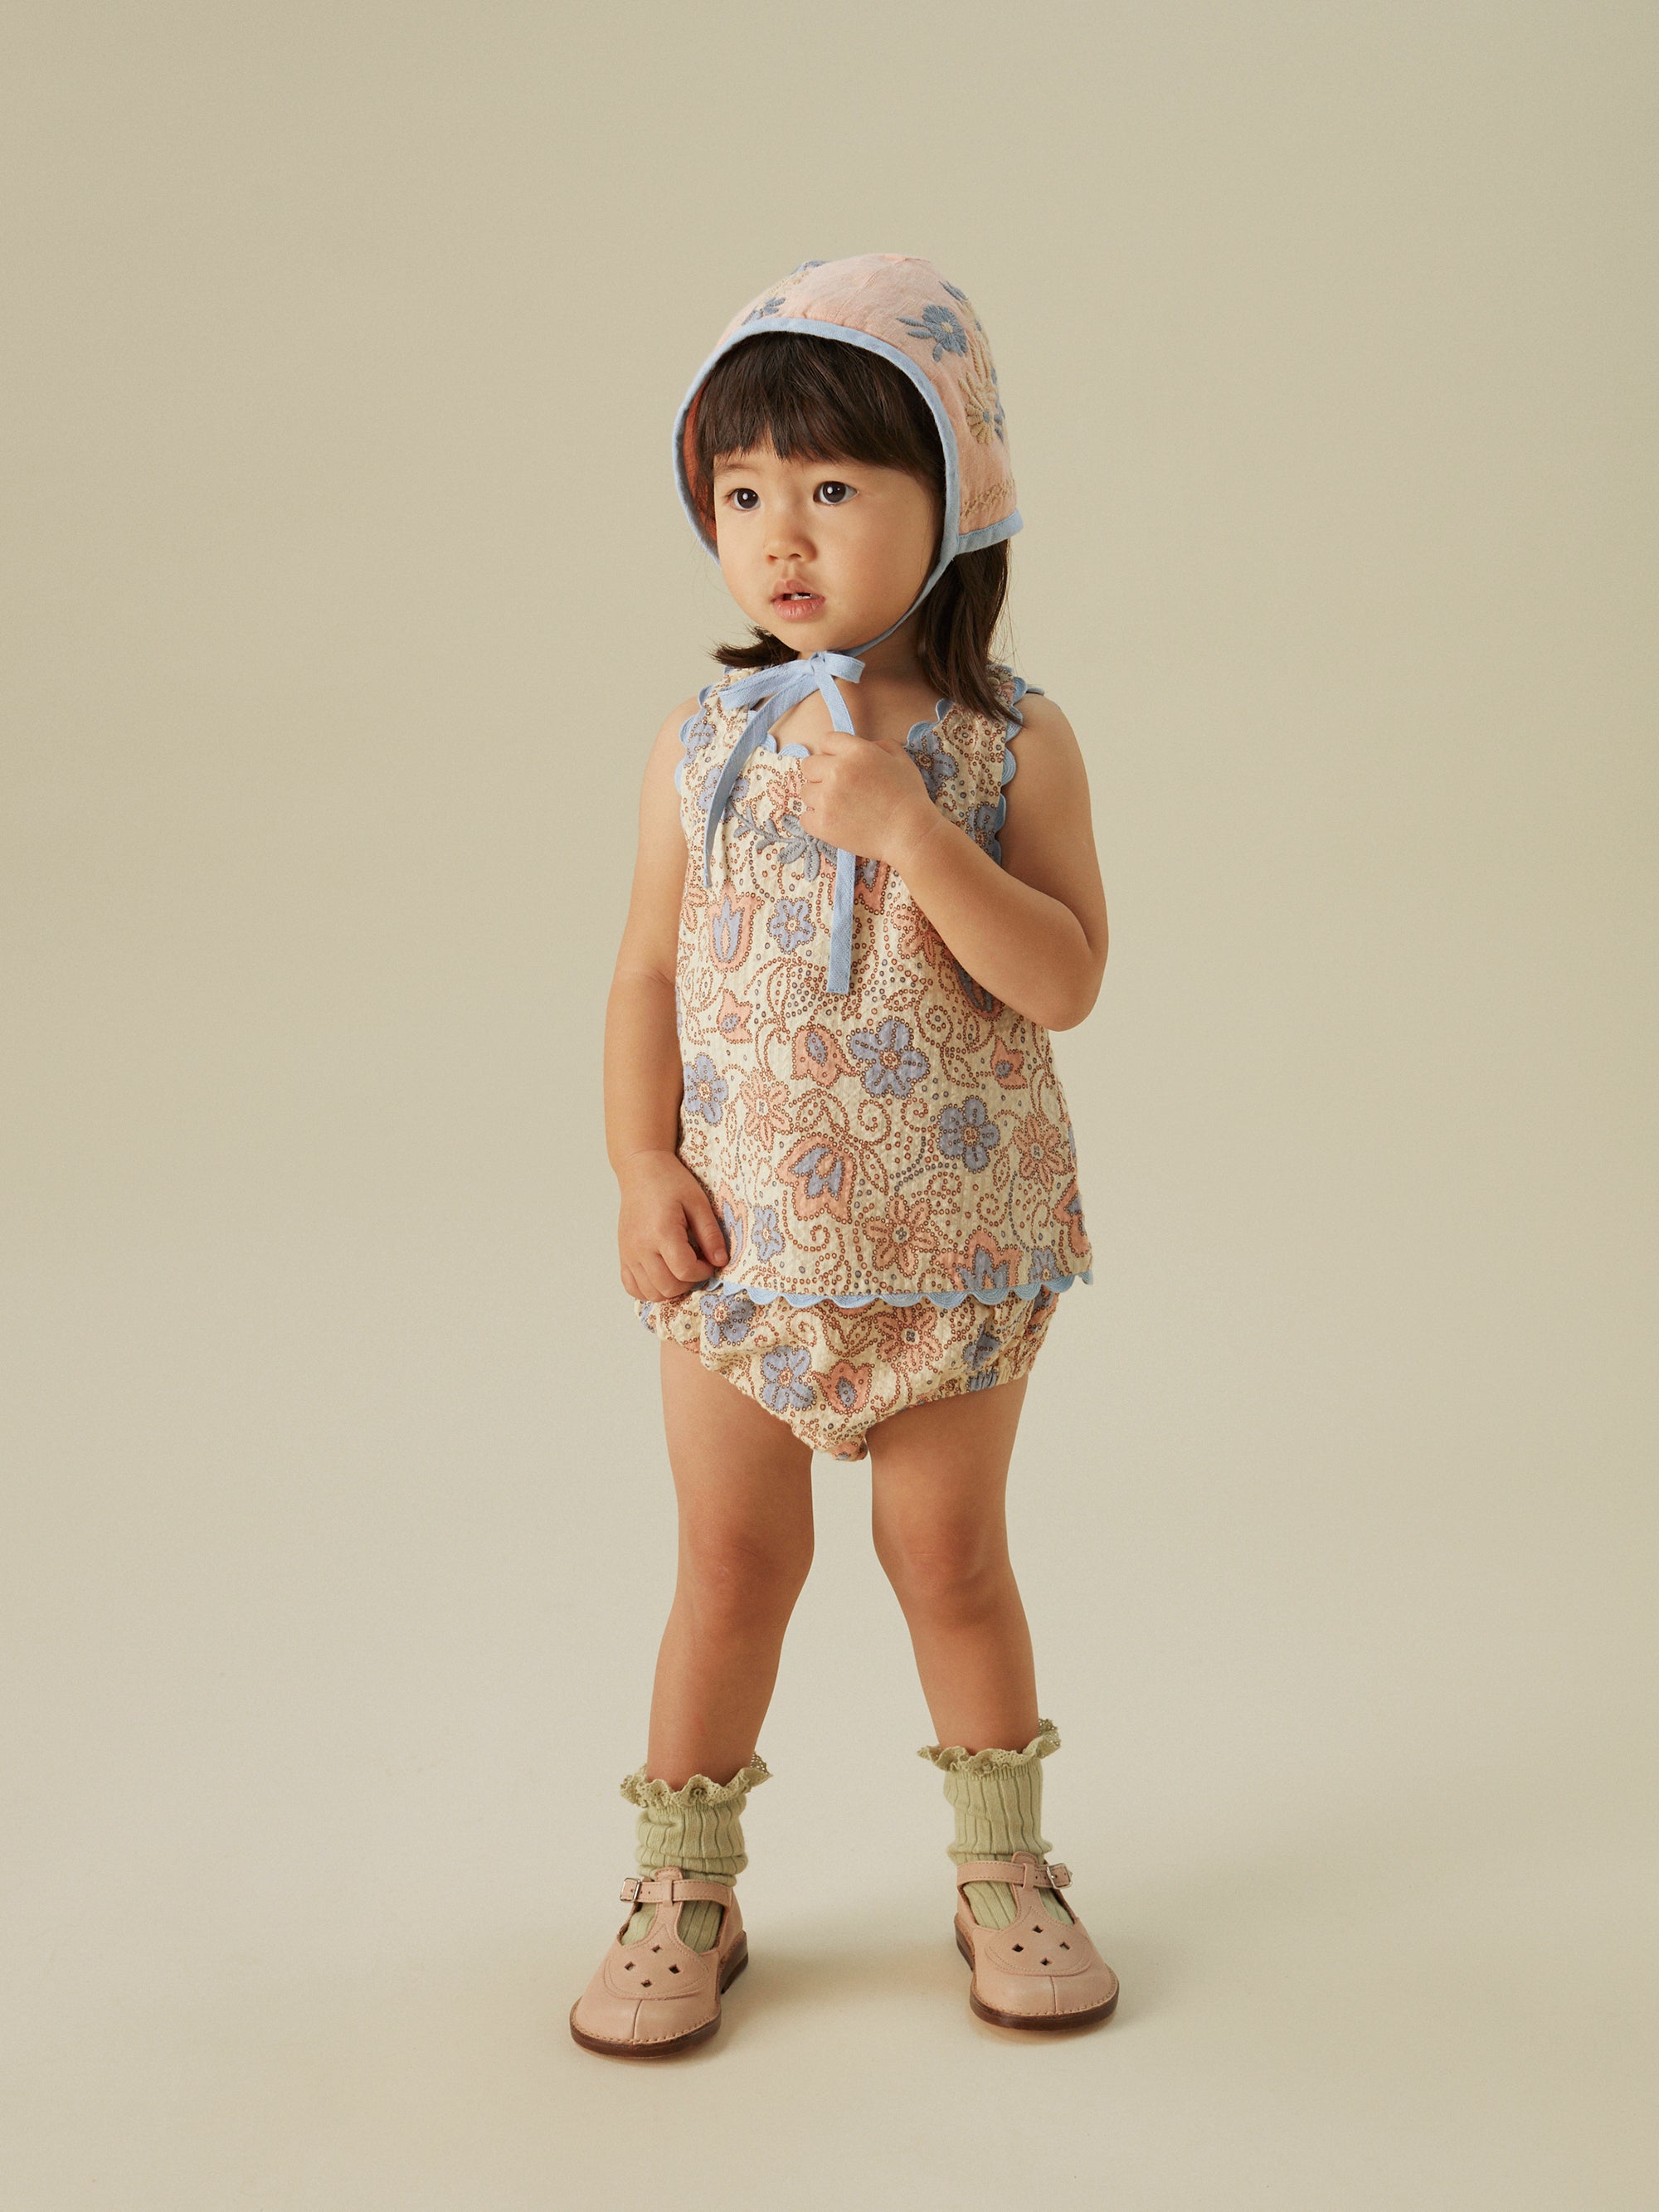 apolina, ss24, summer, spring, embroidery, embroidered, child, children's, kids, clothing, dress, smocking, pinafore, skirt, floral, pattern, jacquard